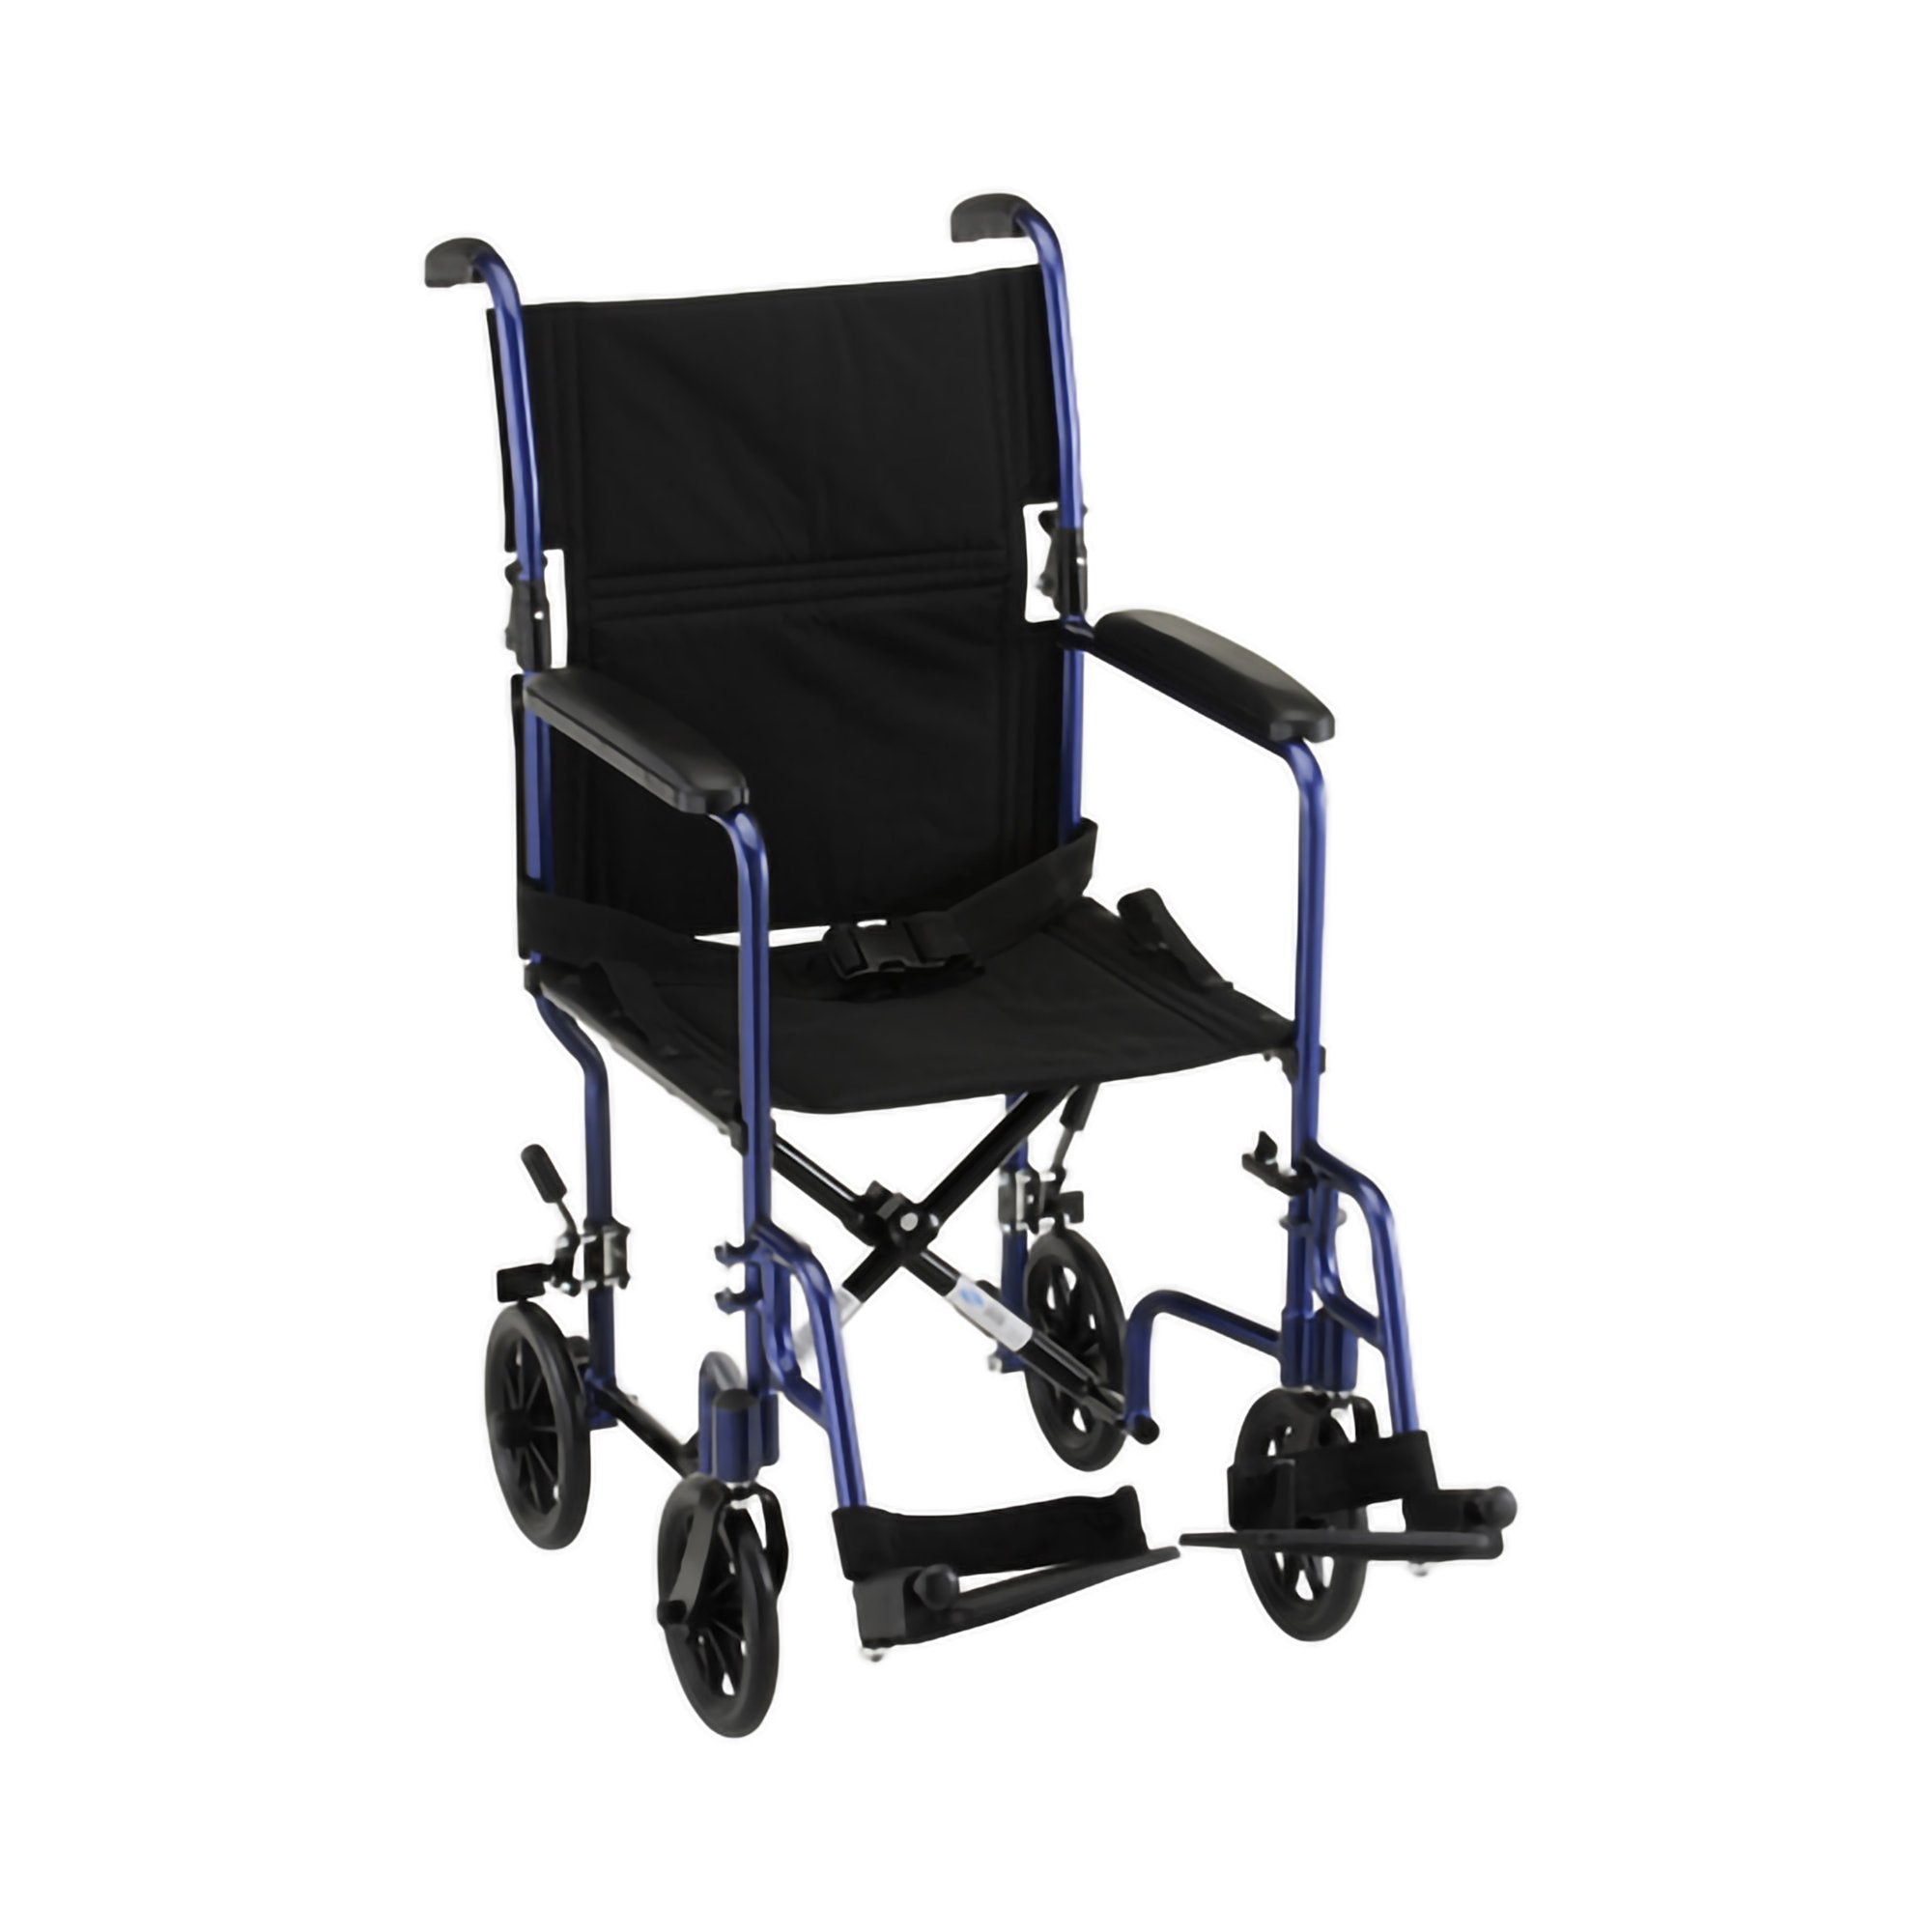 Lightweight Transport Chair Nova 18 Inch Seat Width Full Length / Fixed Height Arm 300 lbs. Weight Capacity Blue Upholstery